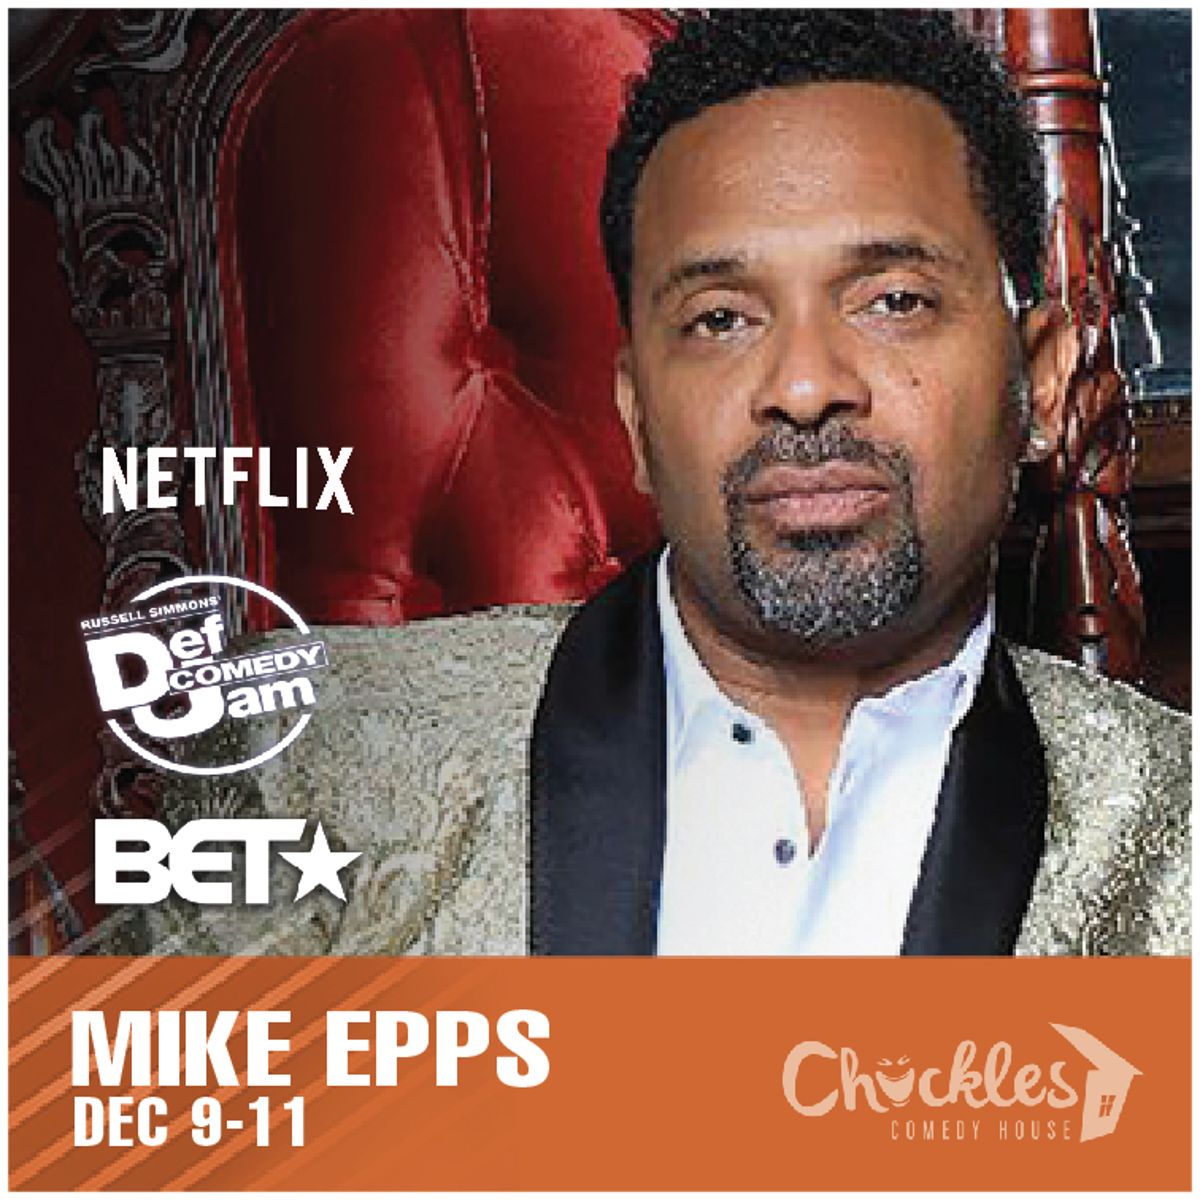 Mike Epps Chuckles Comedy House